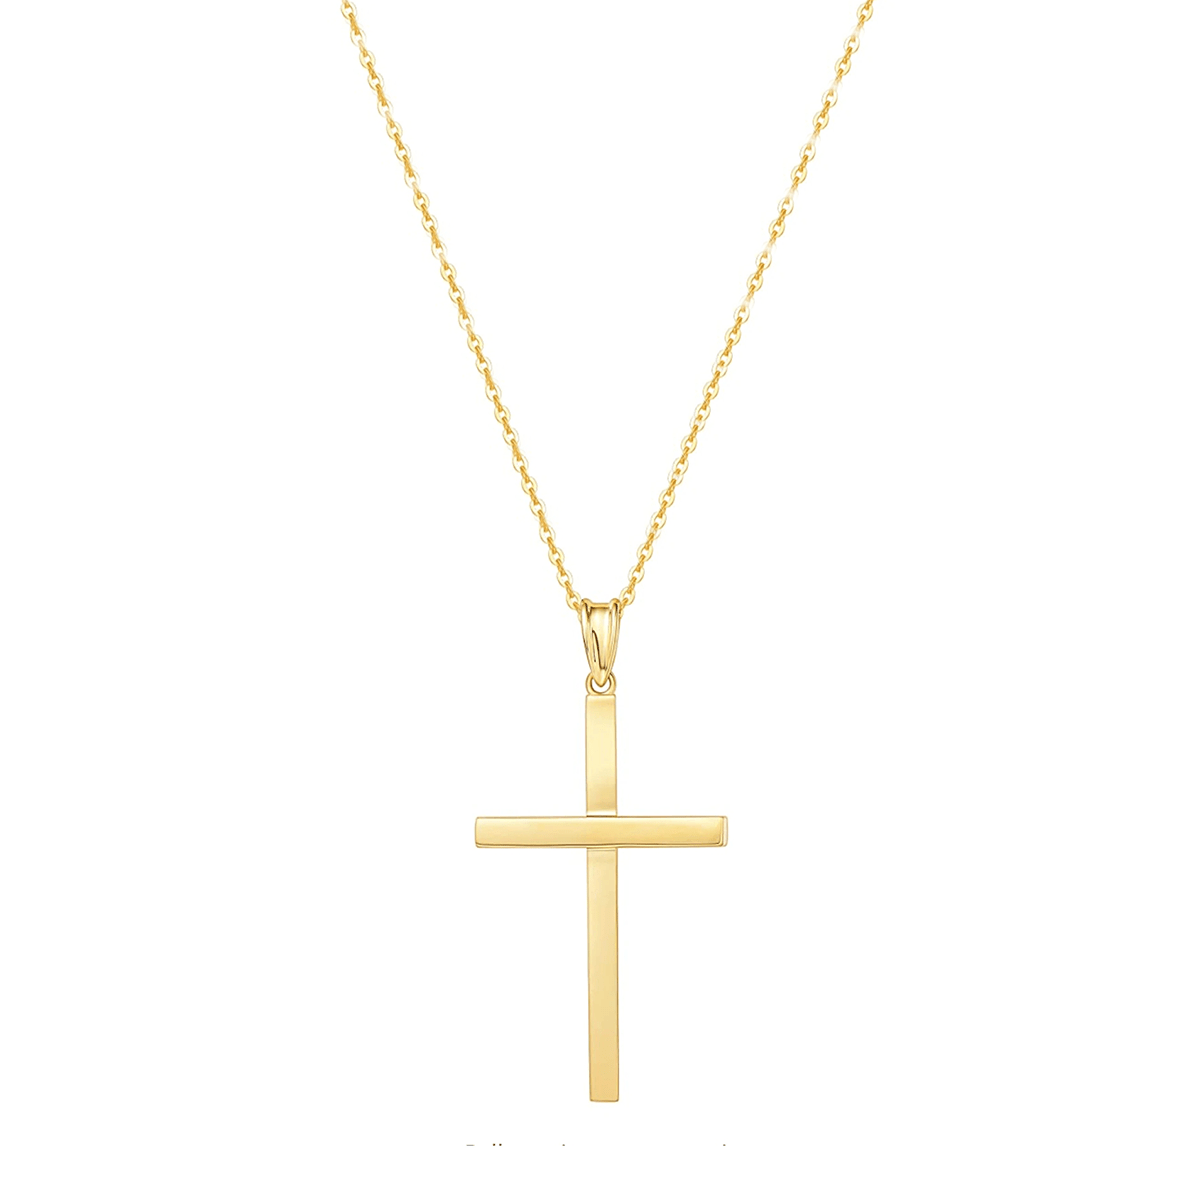 Minimal design gold cross necklace in yellow gold